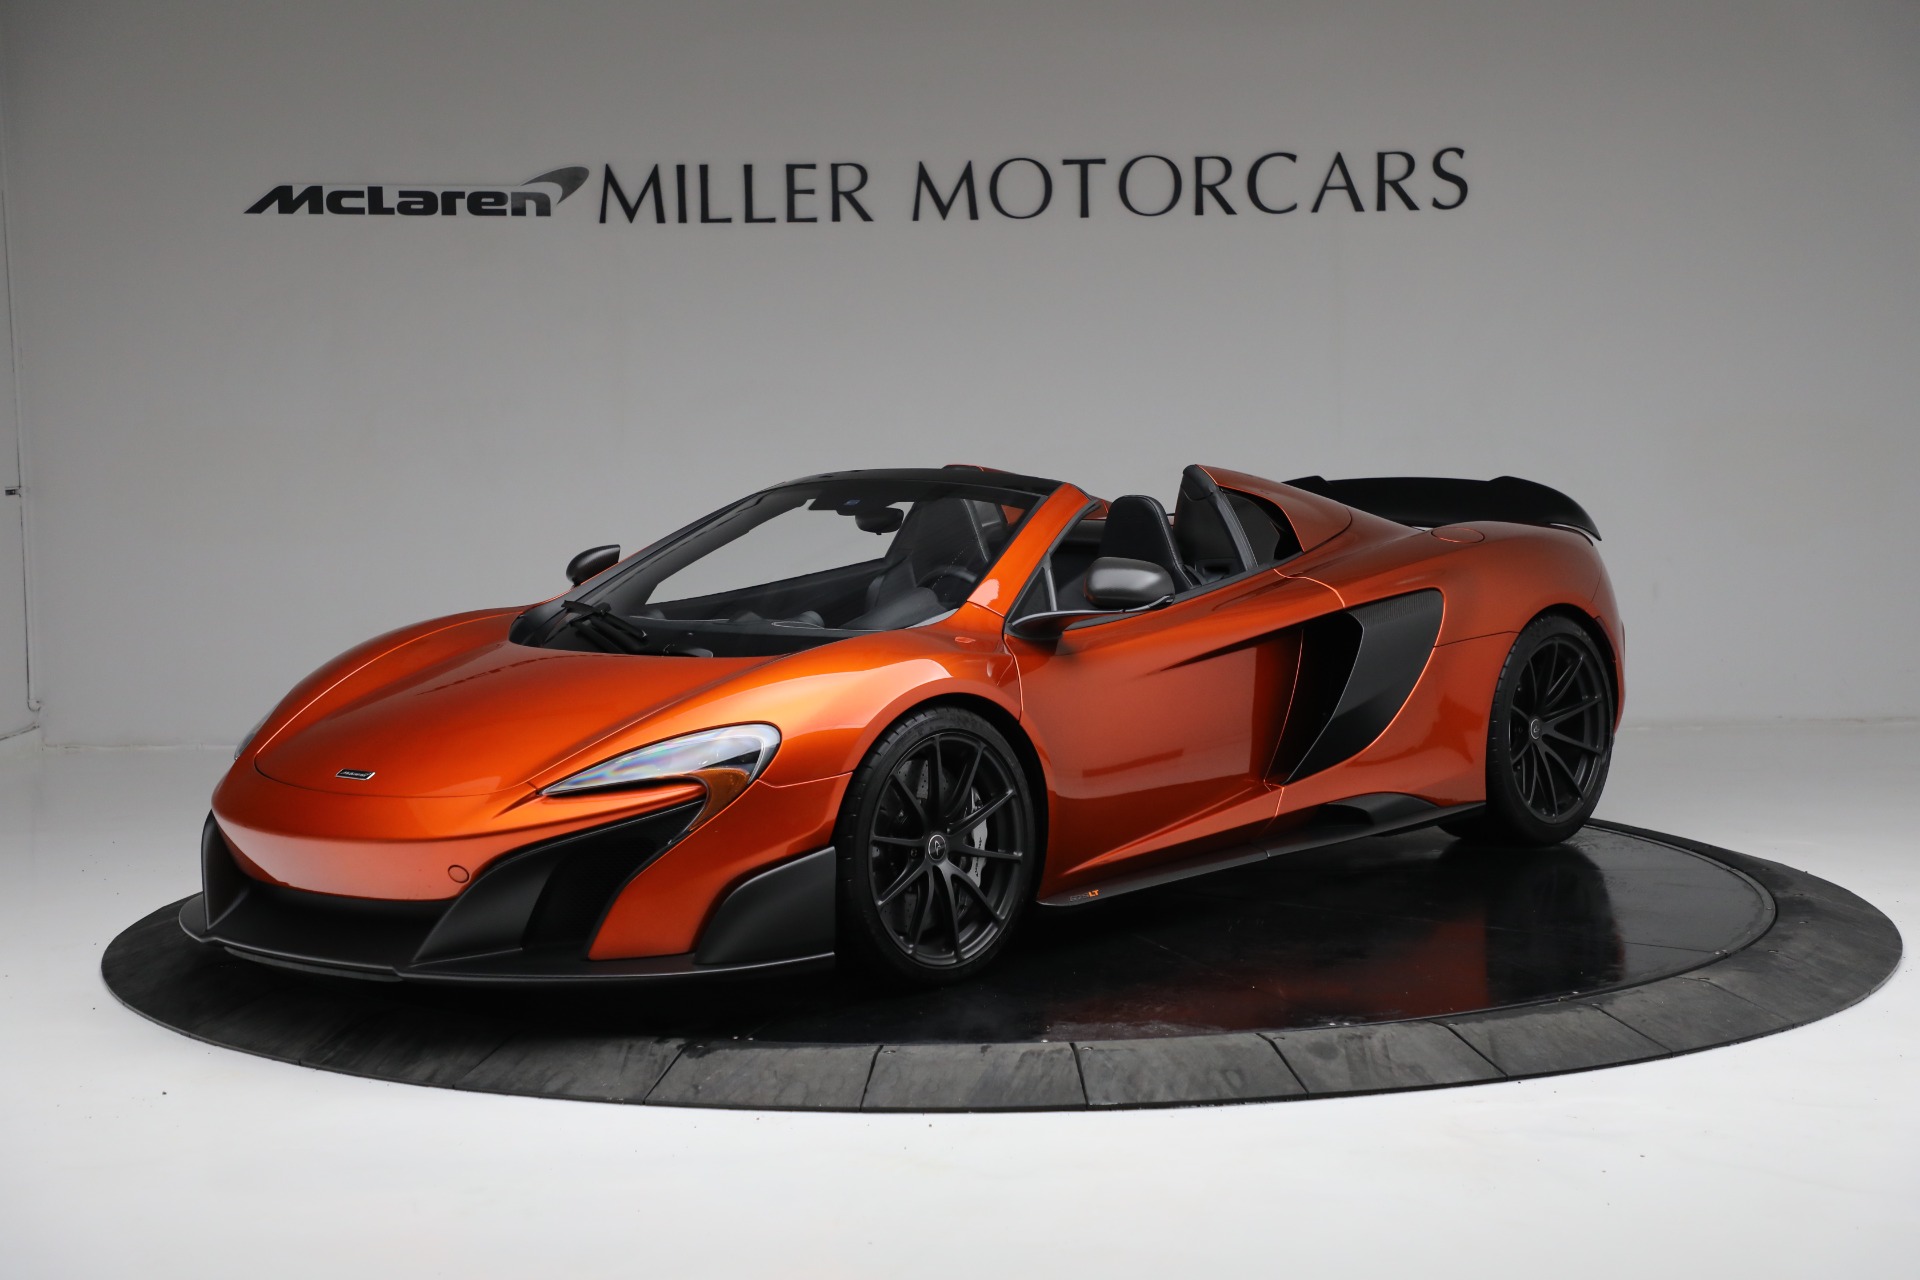 Used 2016 McLaren 675LT Spider for sale $280,900 at Pagani of Greenwich in Greenwich CT 06830 1